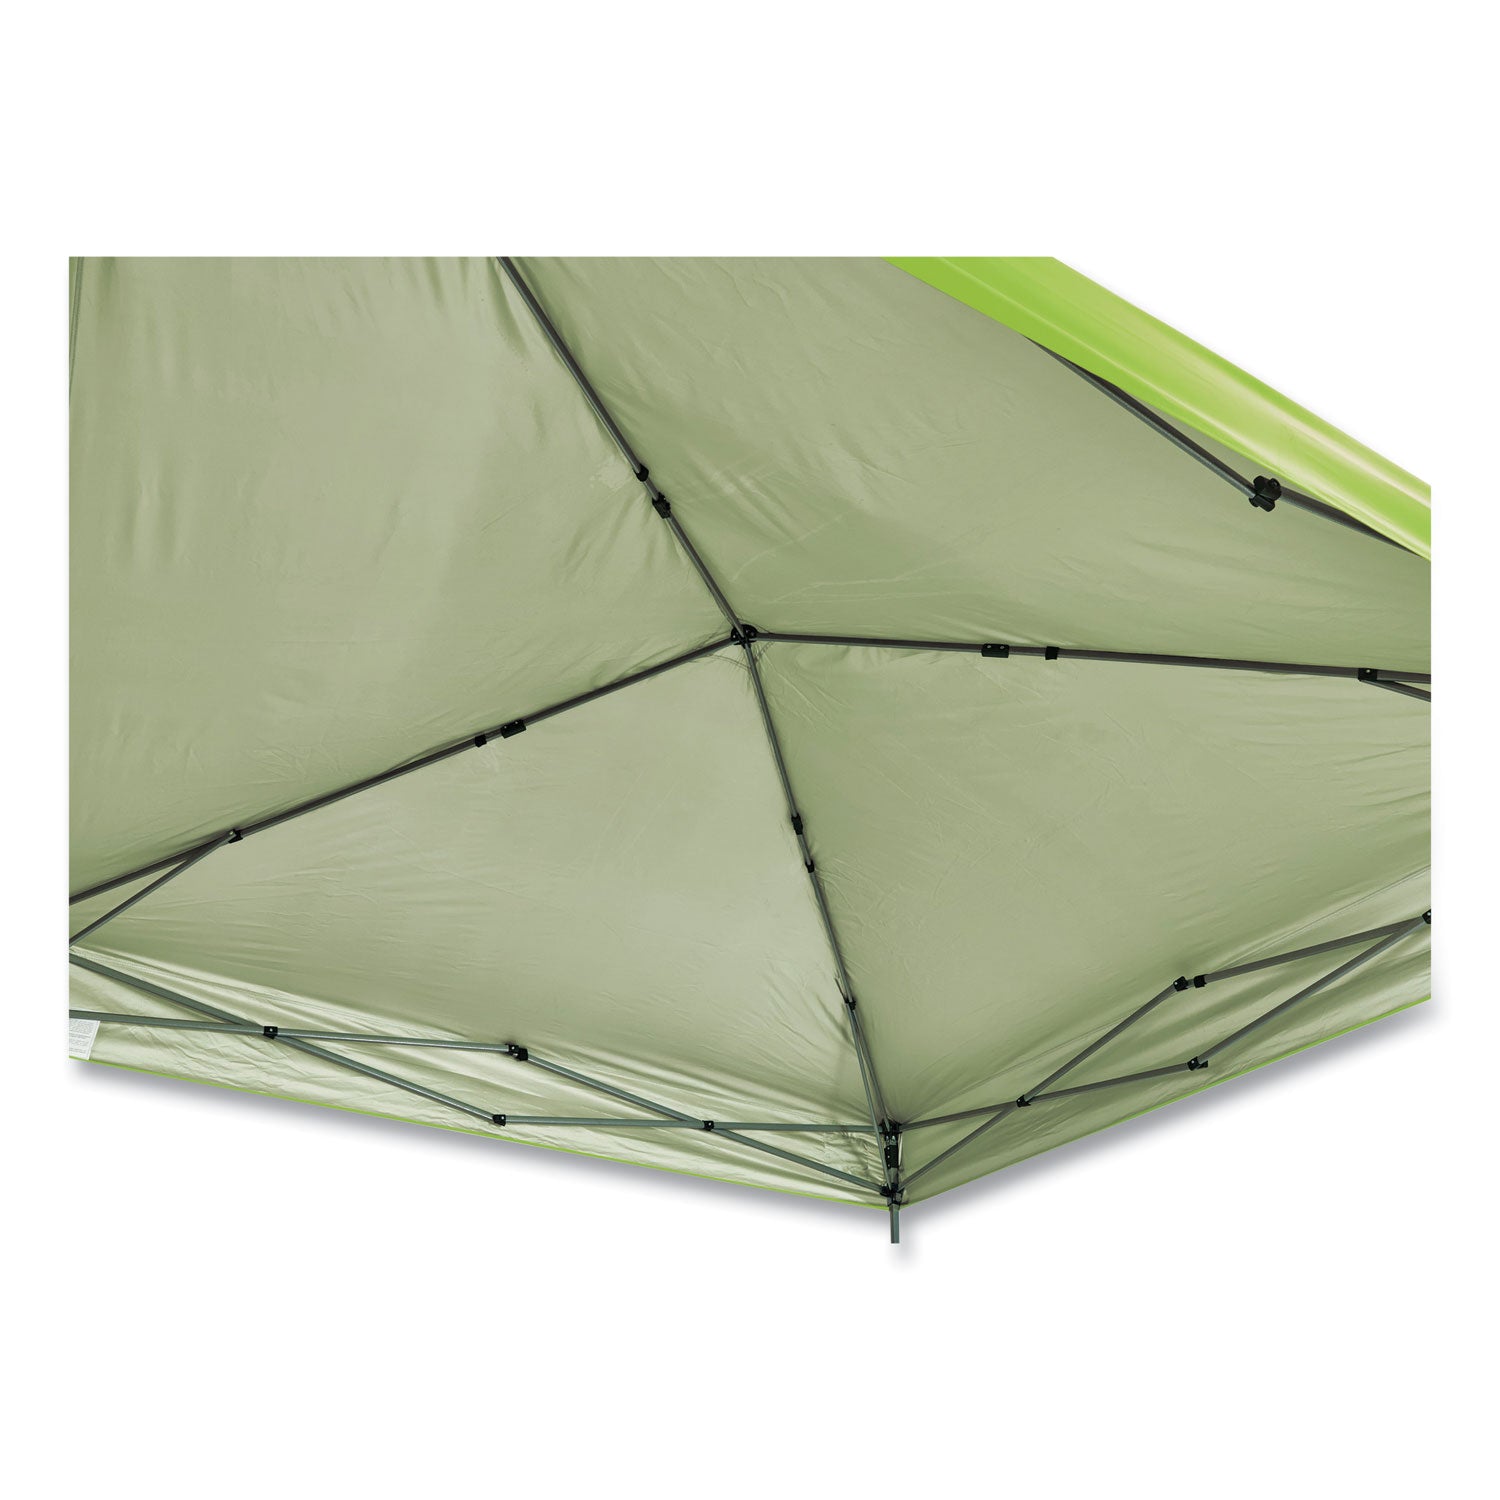 shax-6010c-replacement-pop-up-tent-canopy-for-6010-10-ft-x-10-ft-polyester-lime-ships-in-1-3-business-days_ego12911 - 4